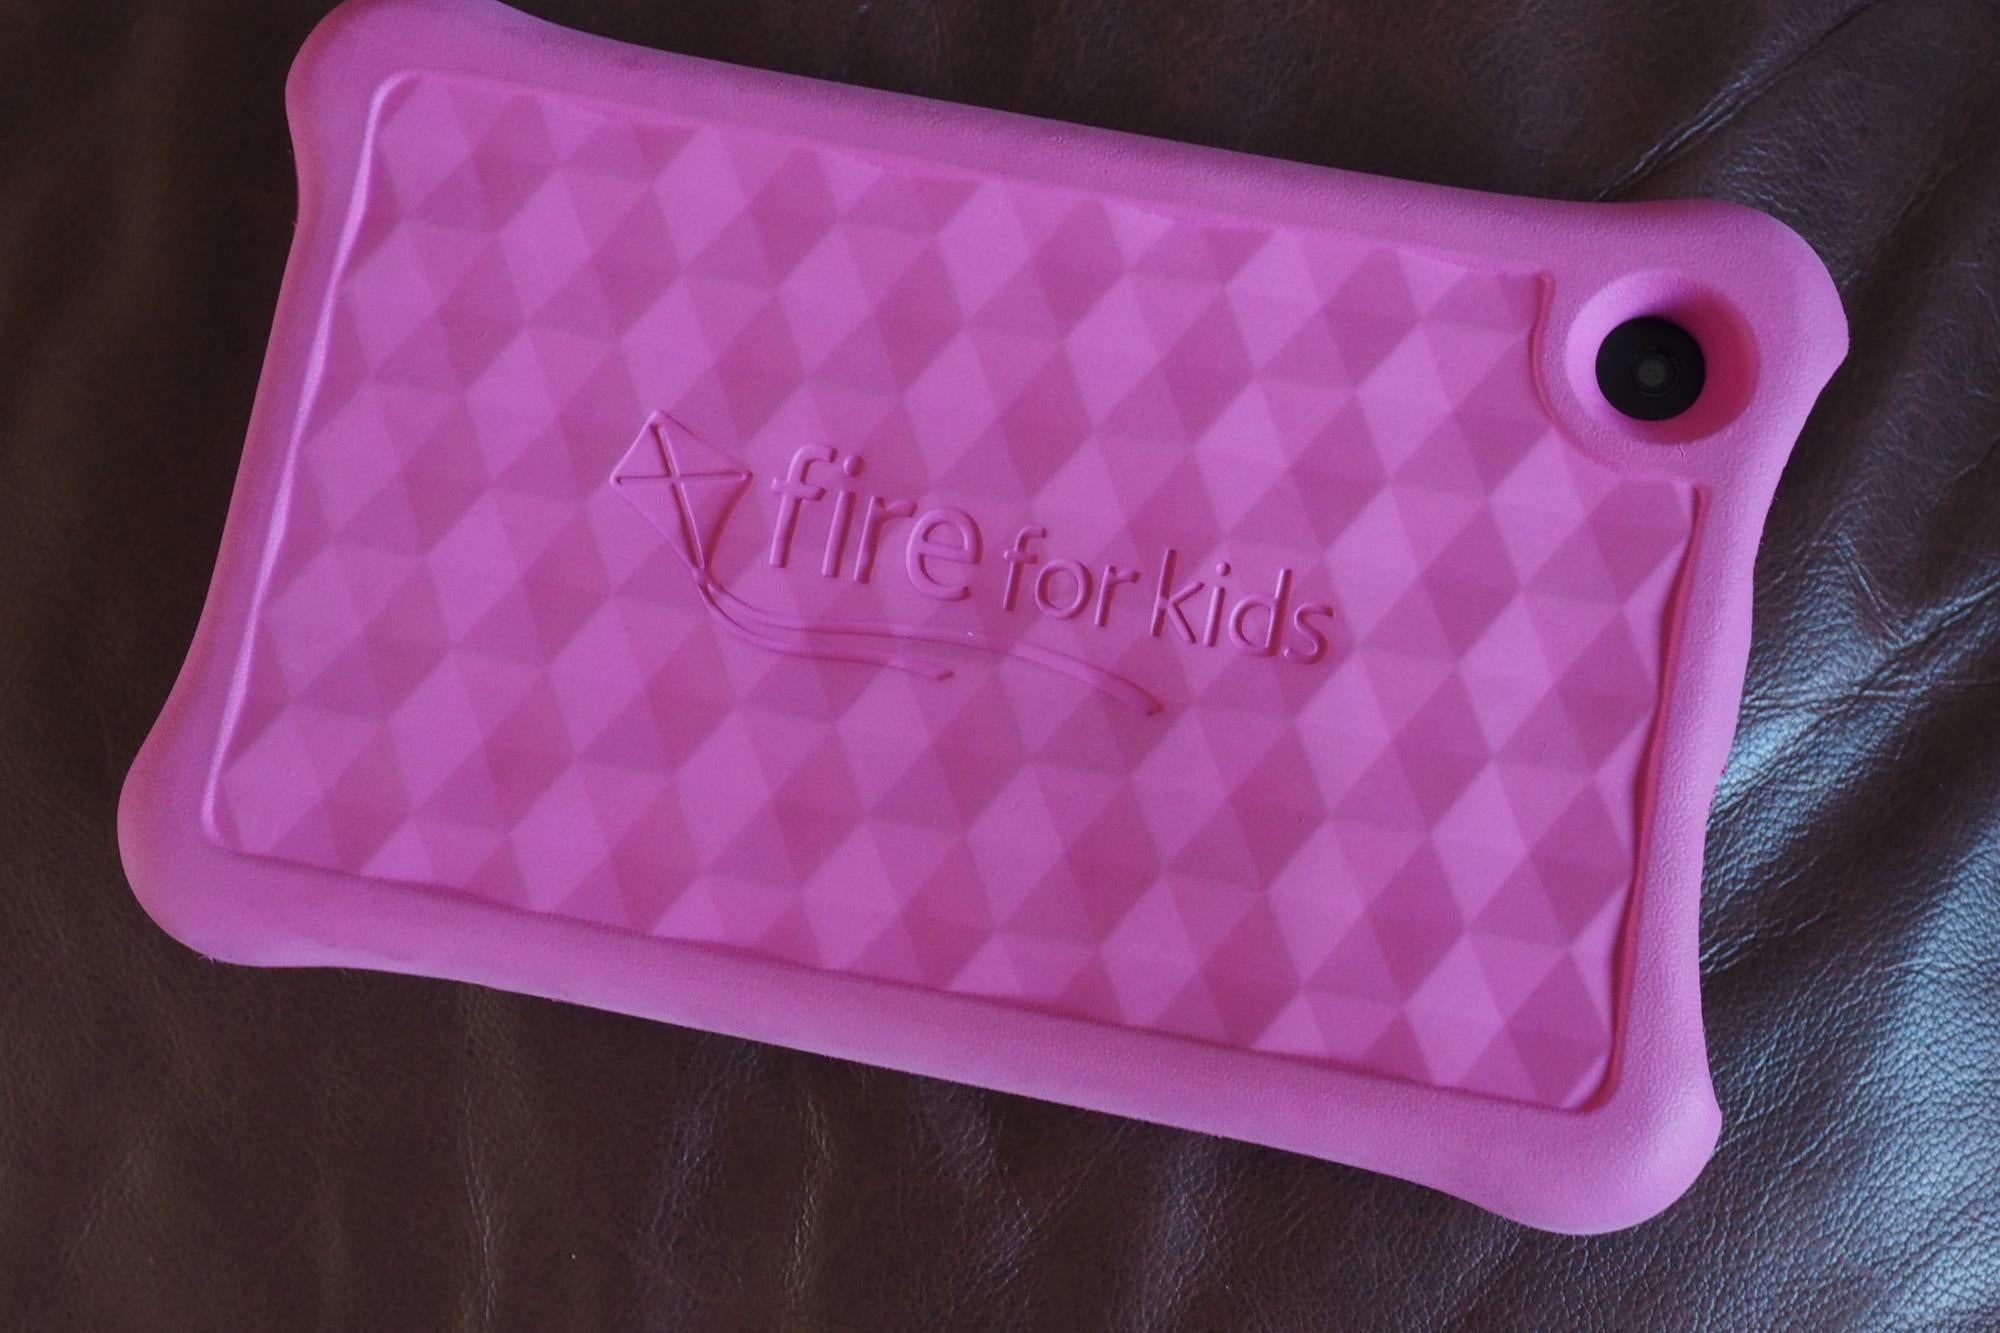 Amazon Fire 7 Kids Edition tablet in pink kid-proof case.